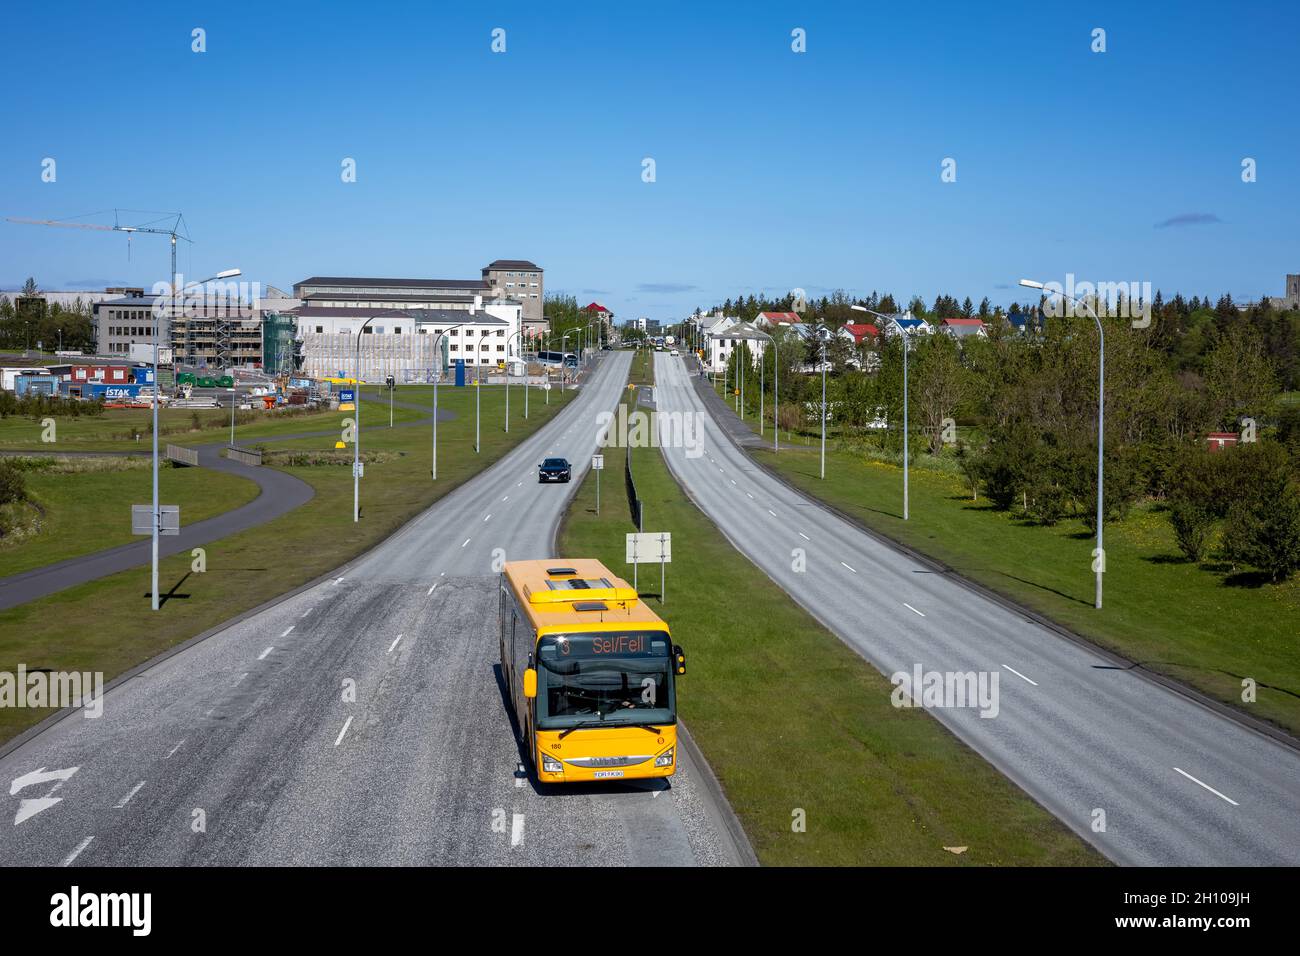 REYKJAVIK, ICELAND - June 12, 2021: A view from a Njardargata overpass to Hringbraut road. Scarce car traffic and a yellow city bus. Stock Photo